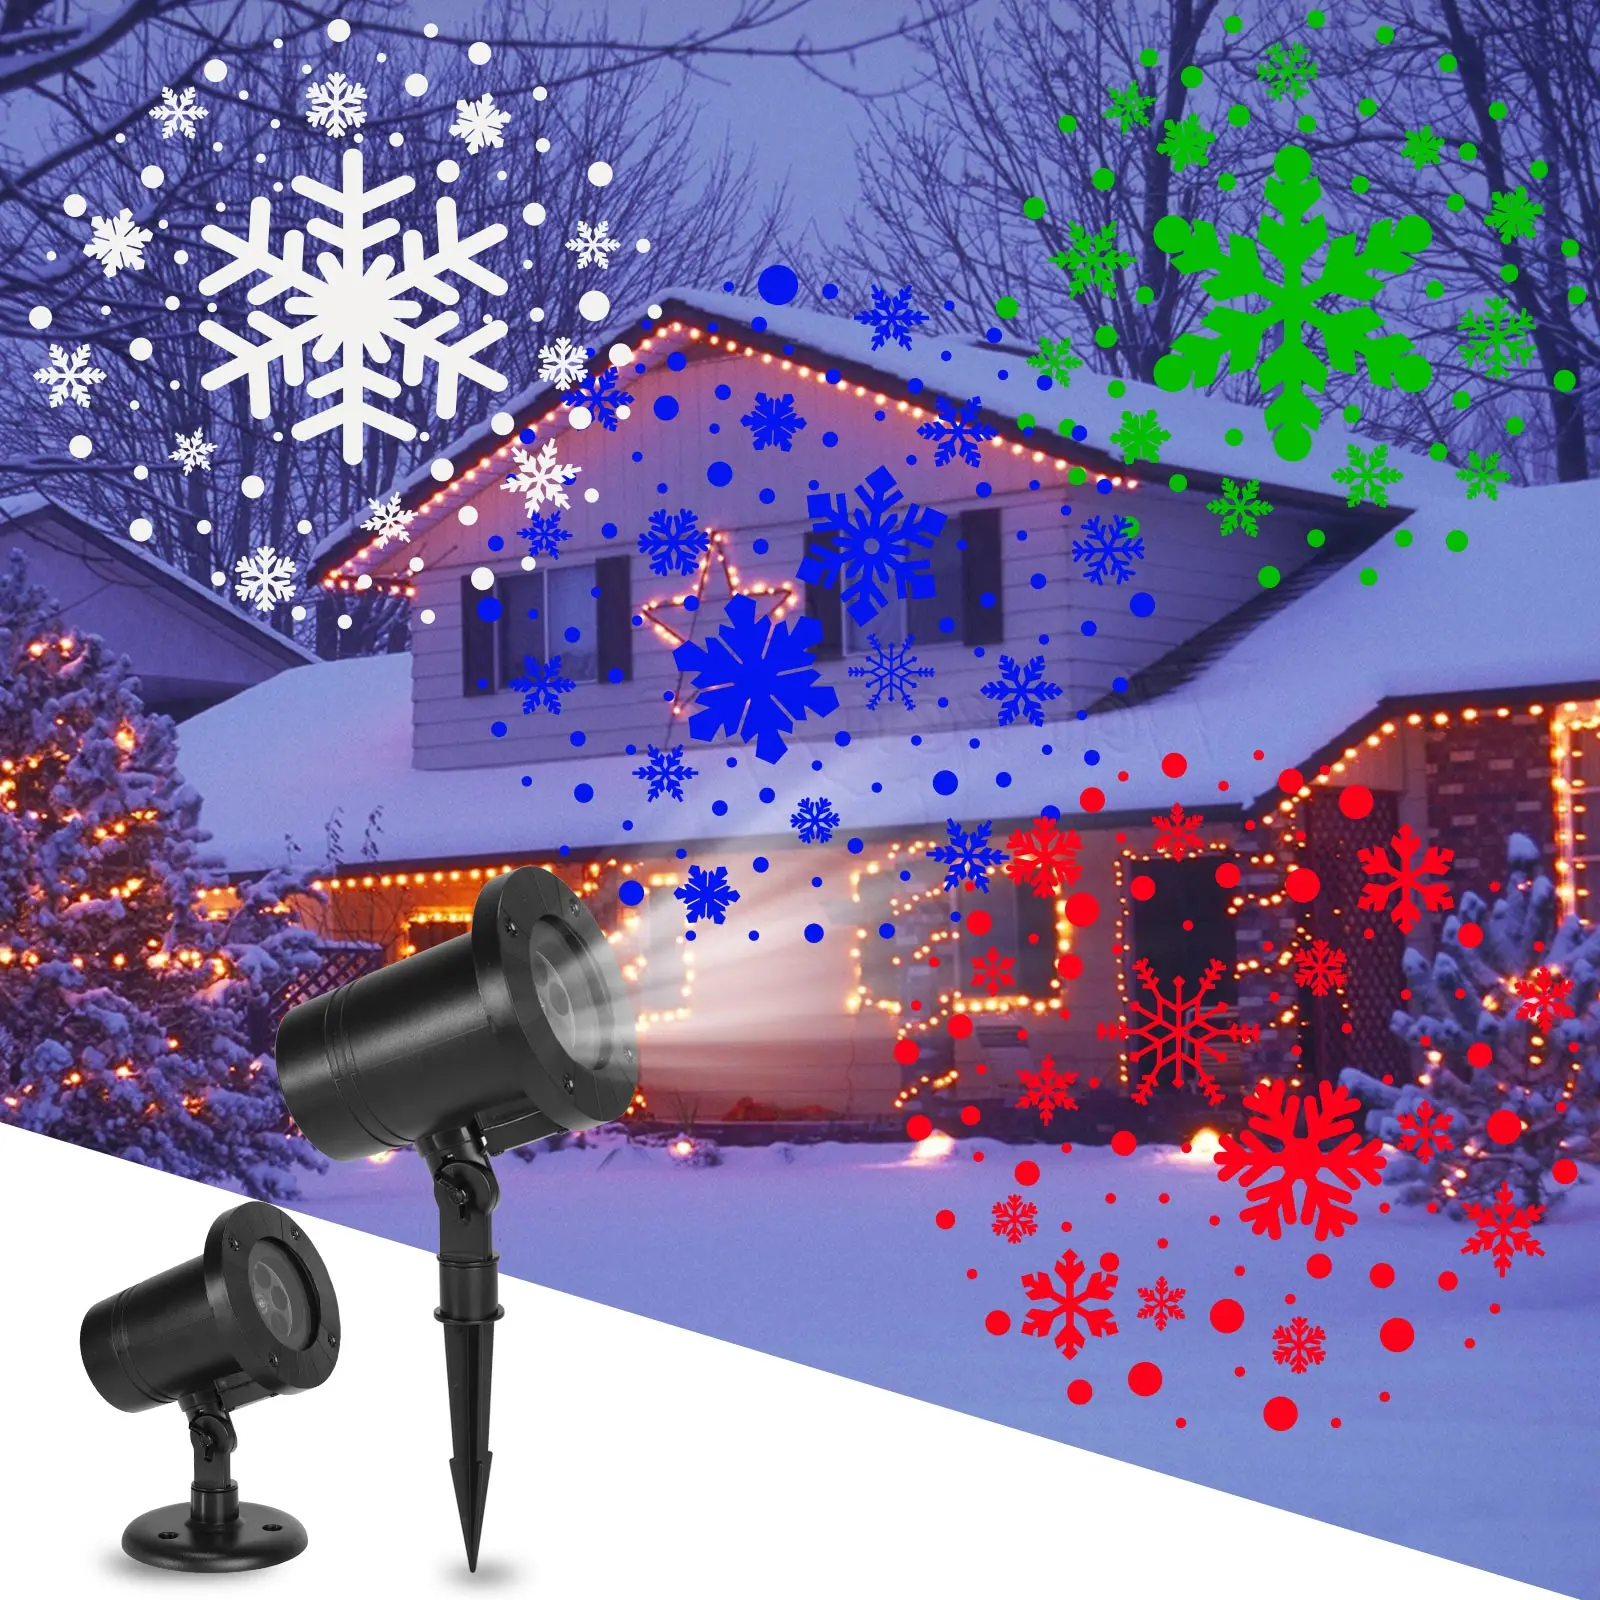 

LED Christmas Snowflake Laser Light Snowfall Projector IP65 Moving Snow Outdoor Garden Laser Projector Lamp LED Projection Light